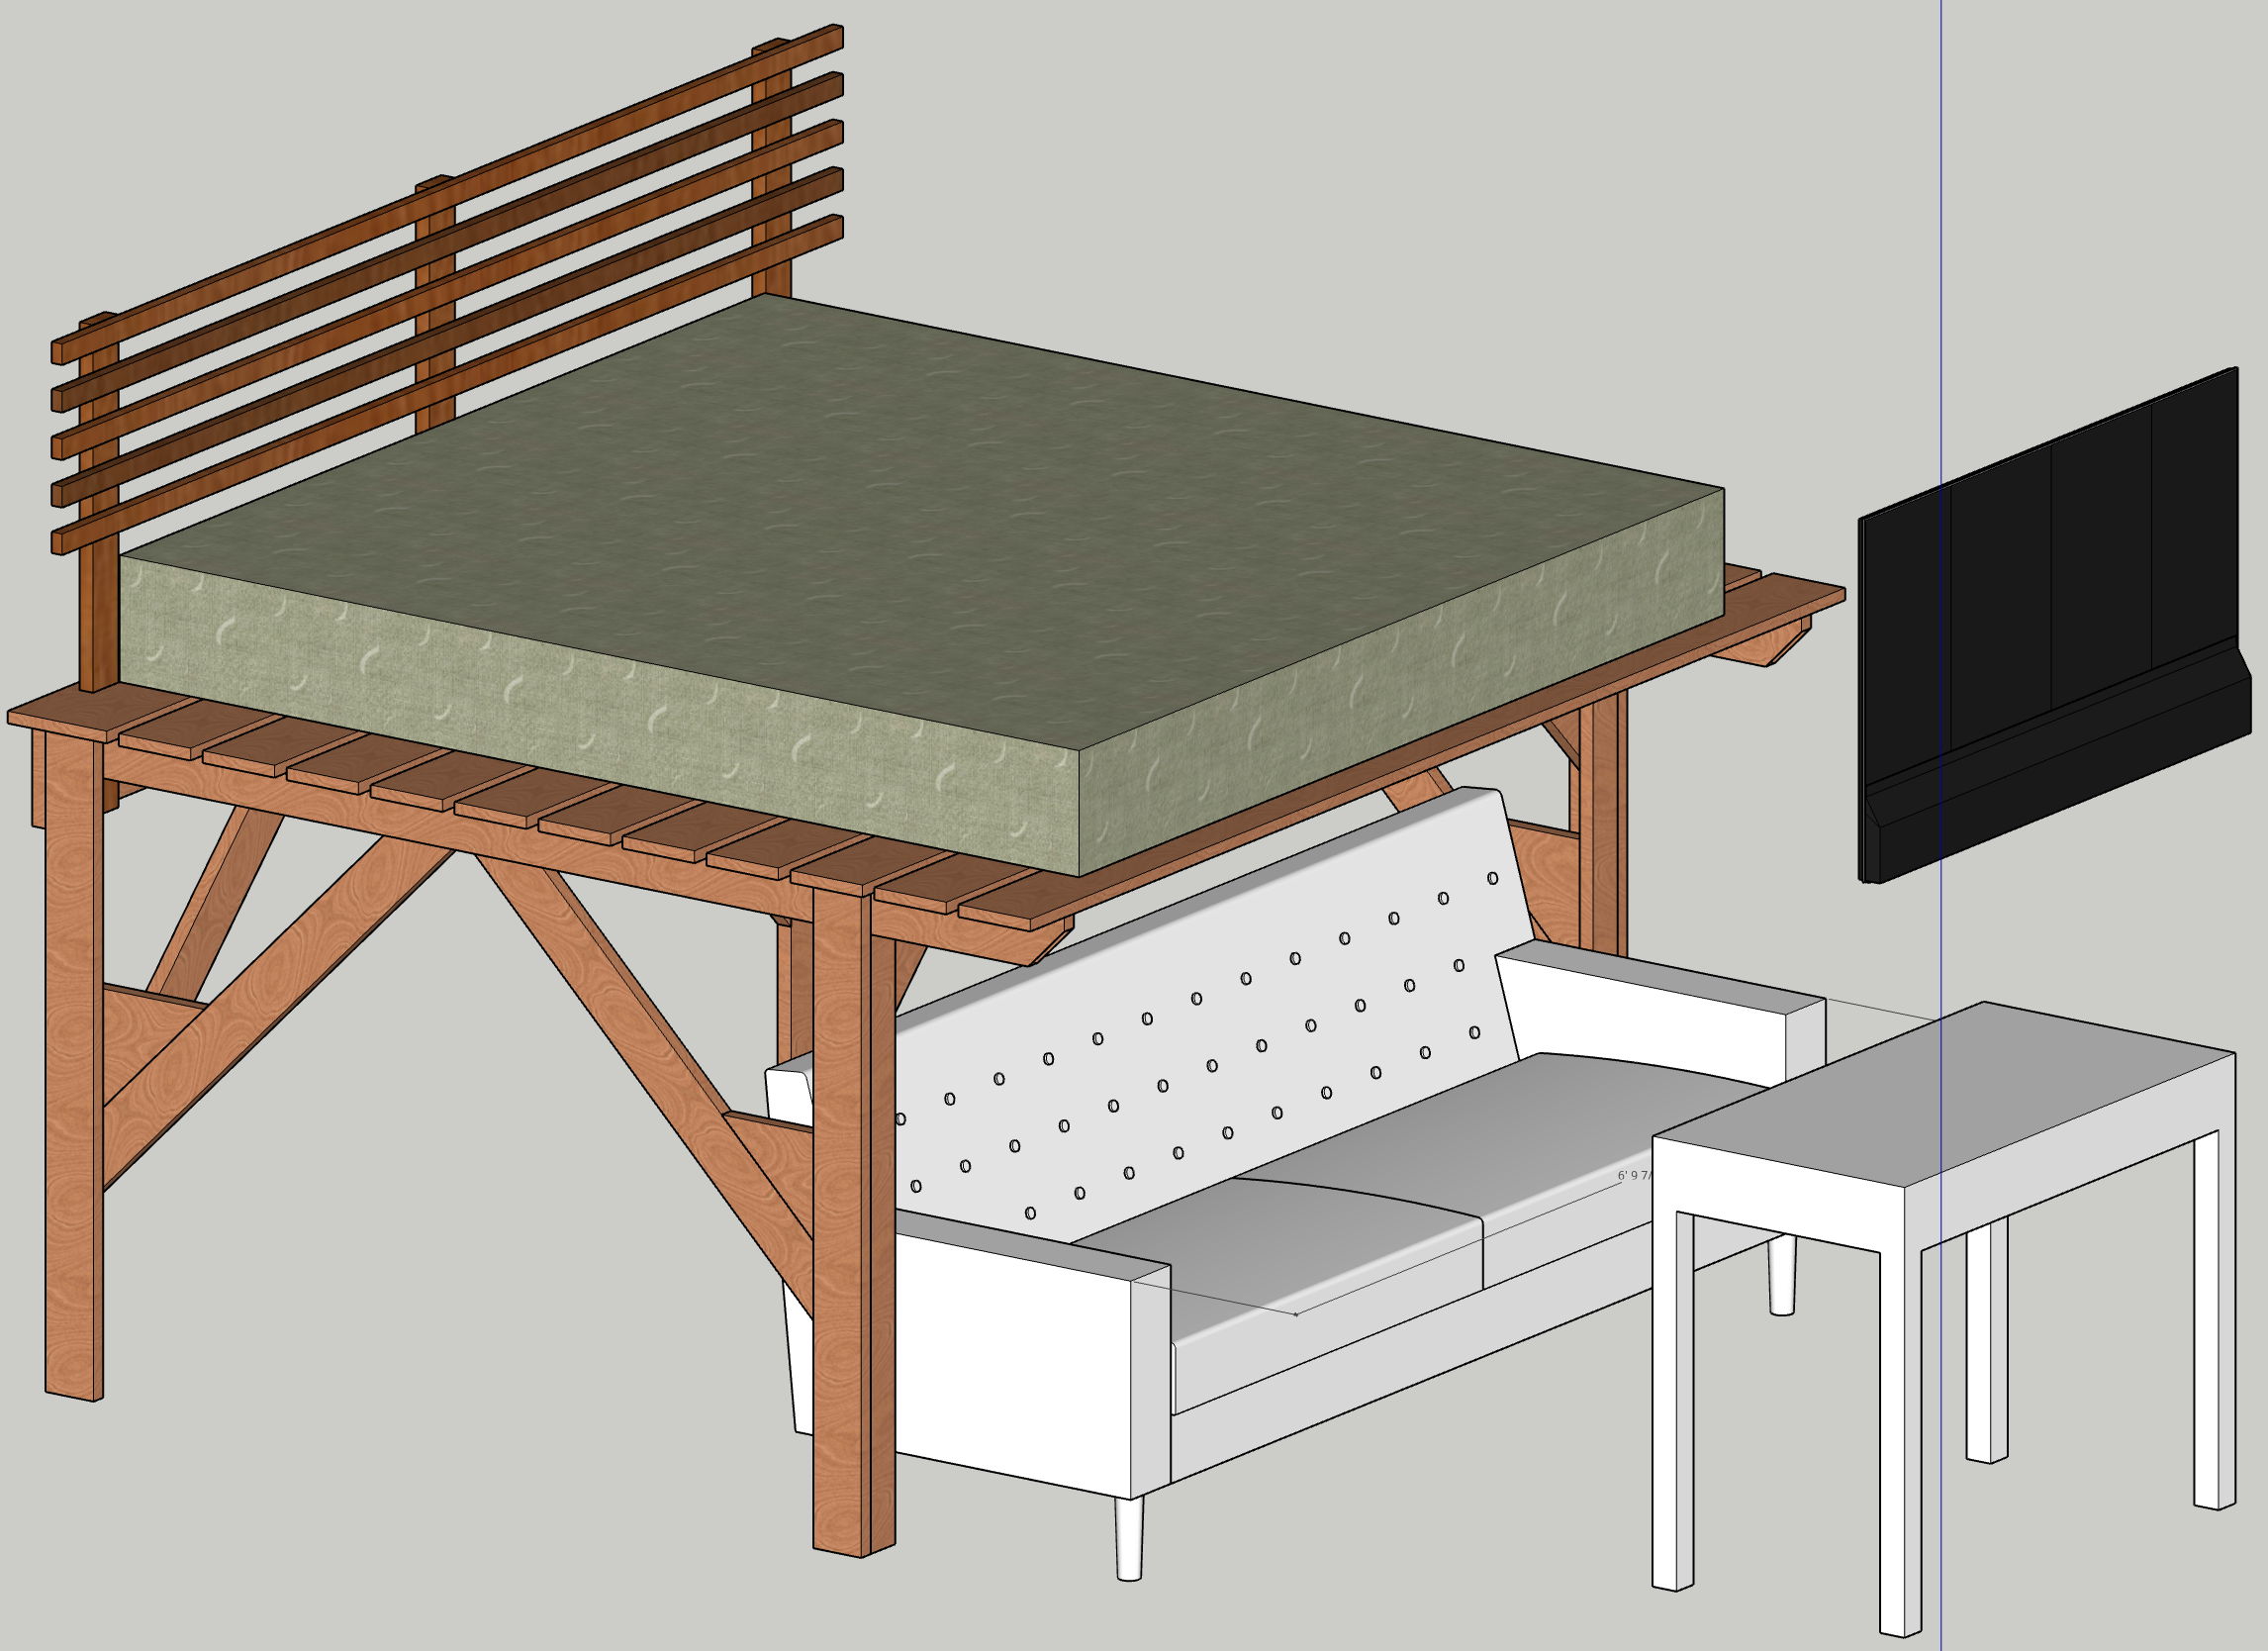 My second draft design, which is bascially what I built other than I added two center support beams.